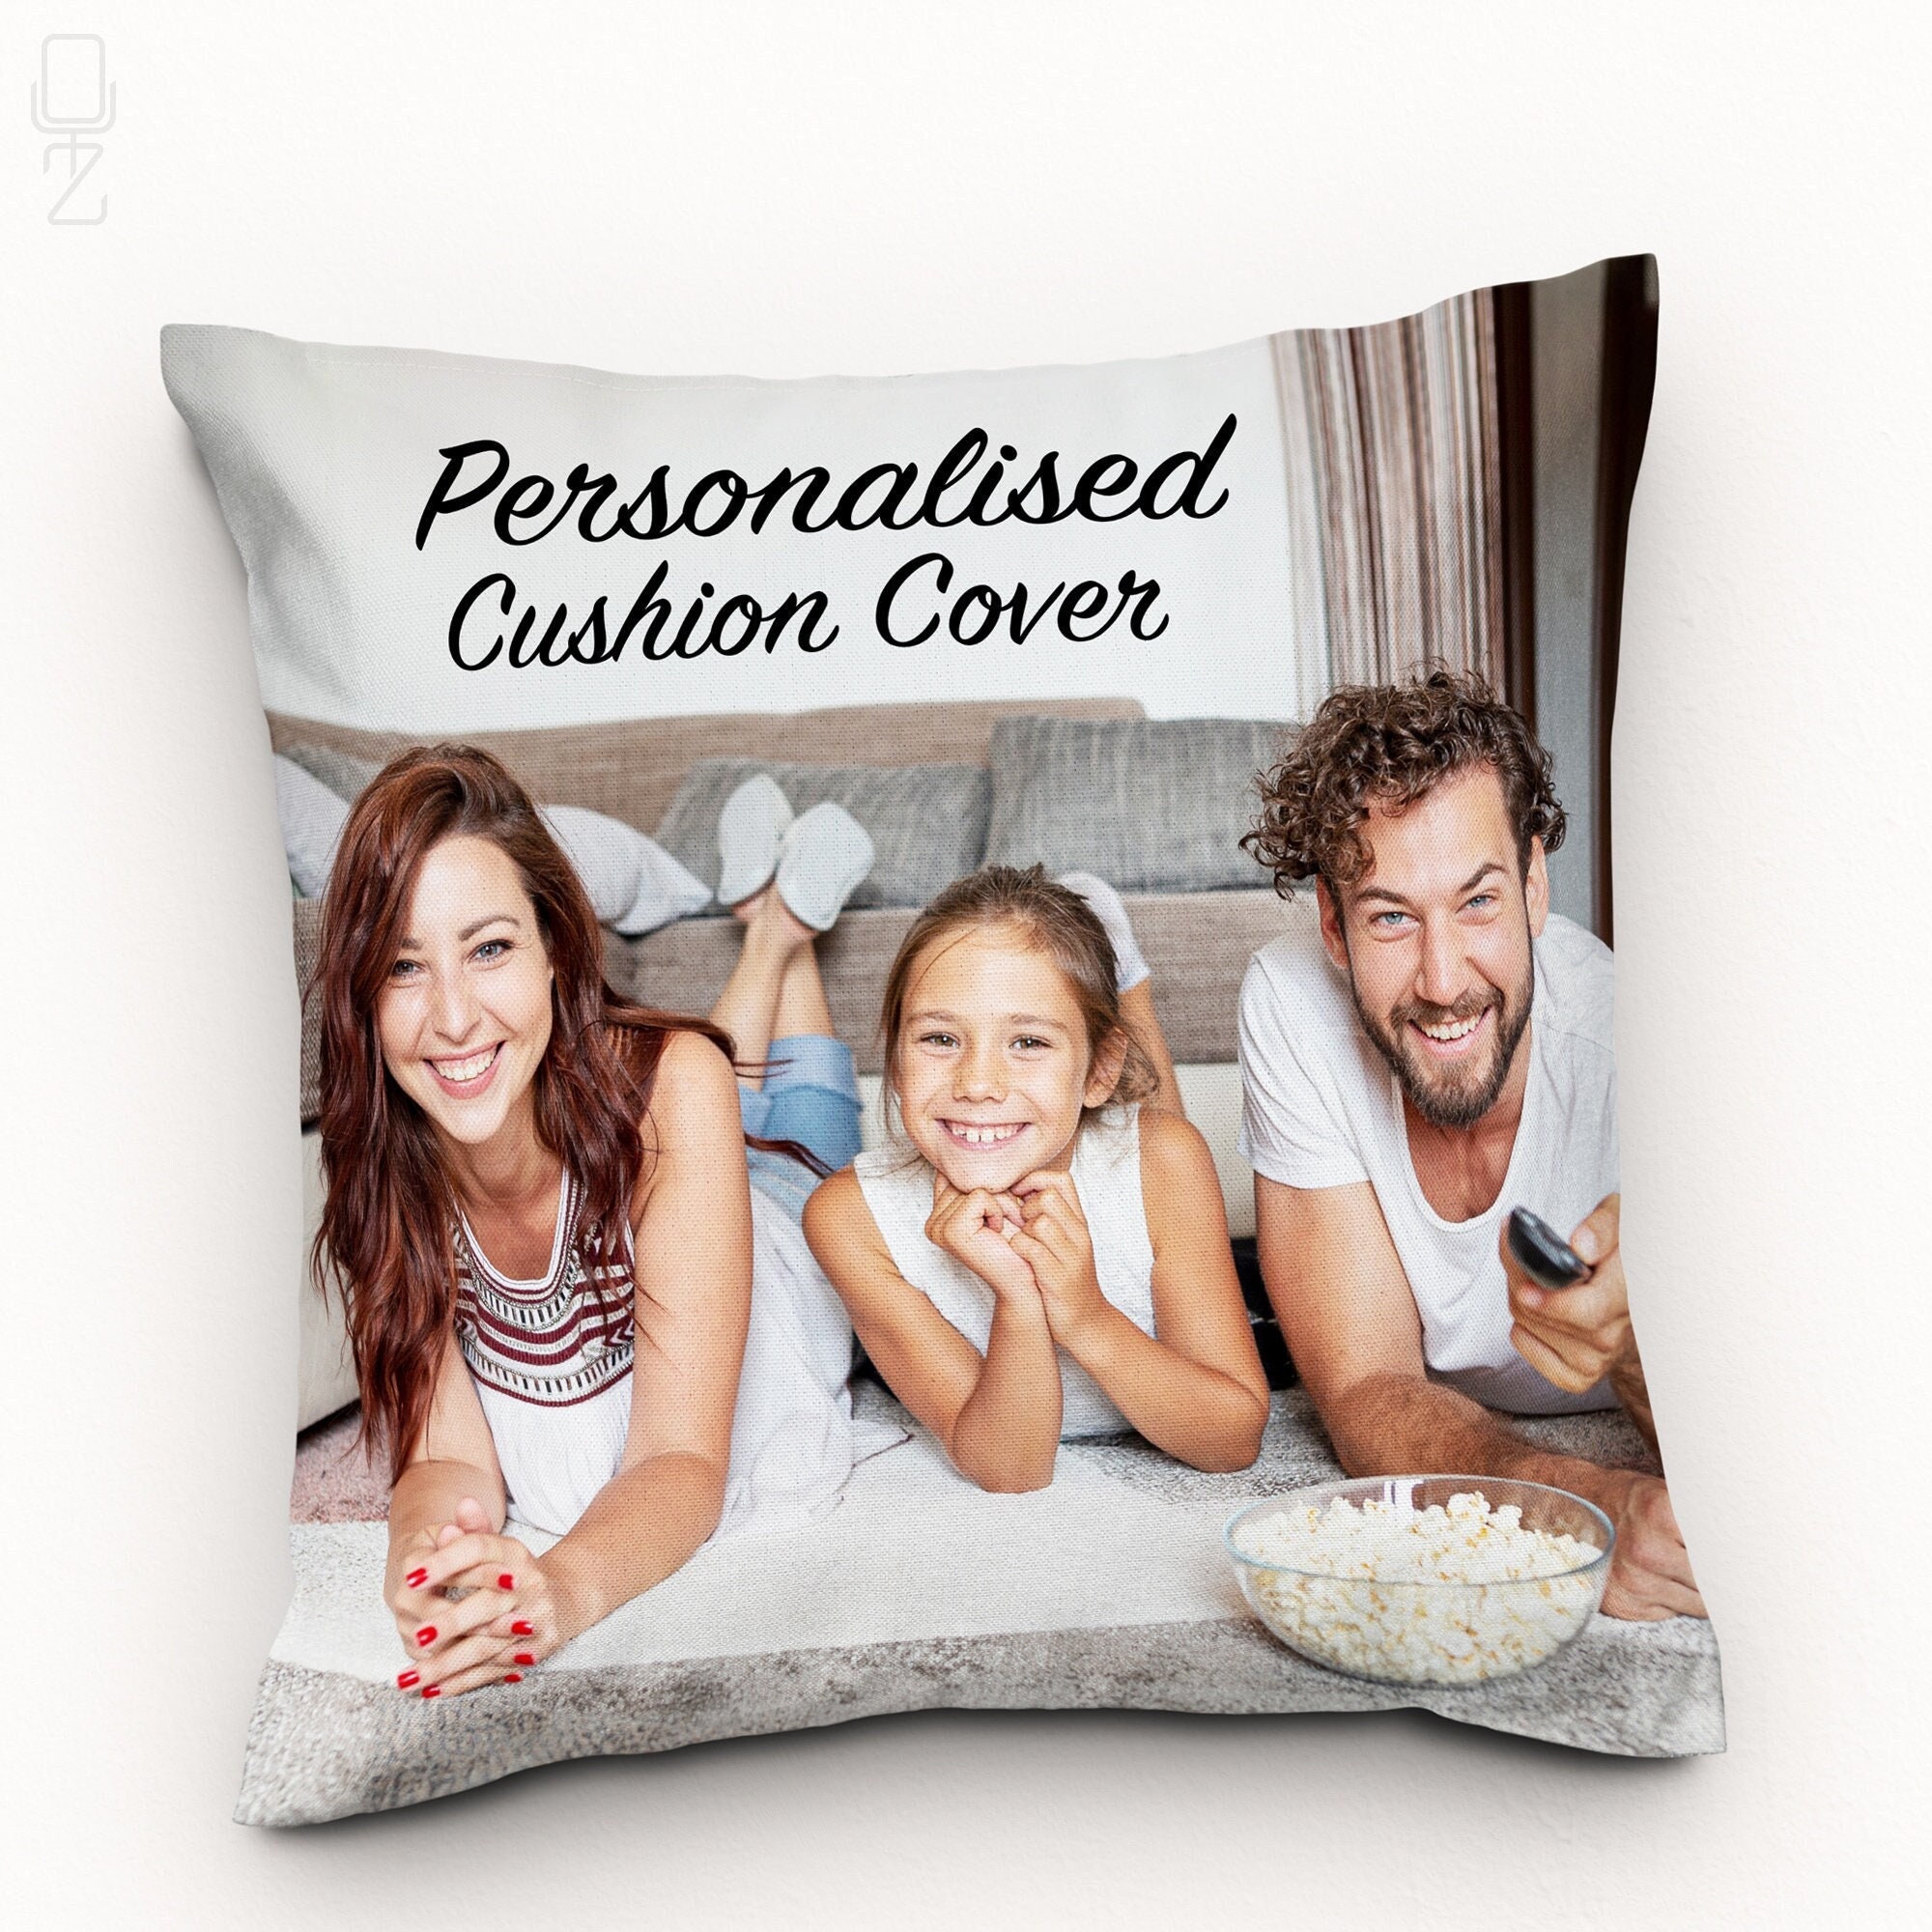 14 X 14 Square Size Decorative Throw Pillow Insert, Hypoallergenic Pillows,  Down Alternative Fill, White Cotton Cover, Breathable Firm Soft 